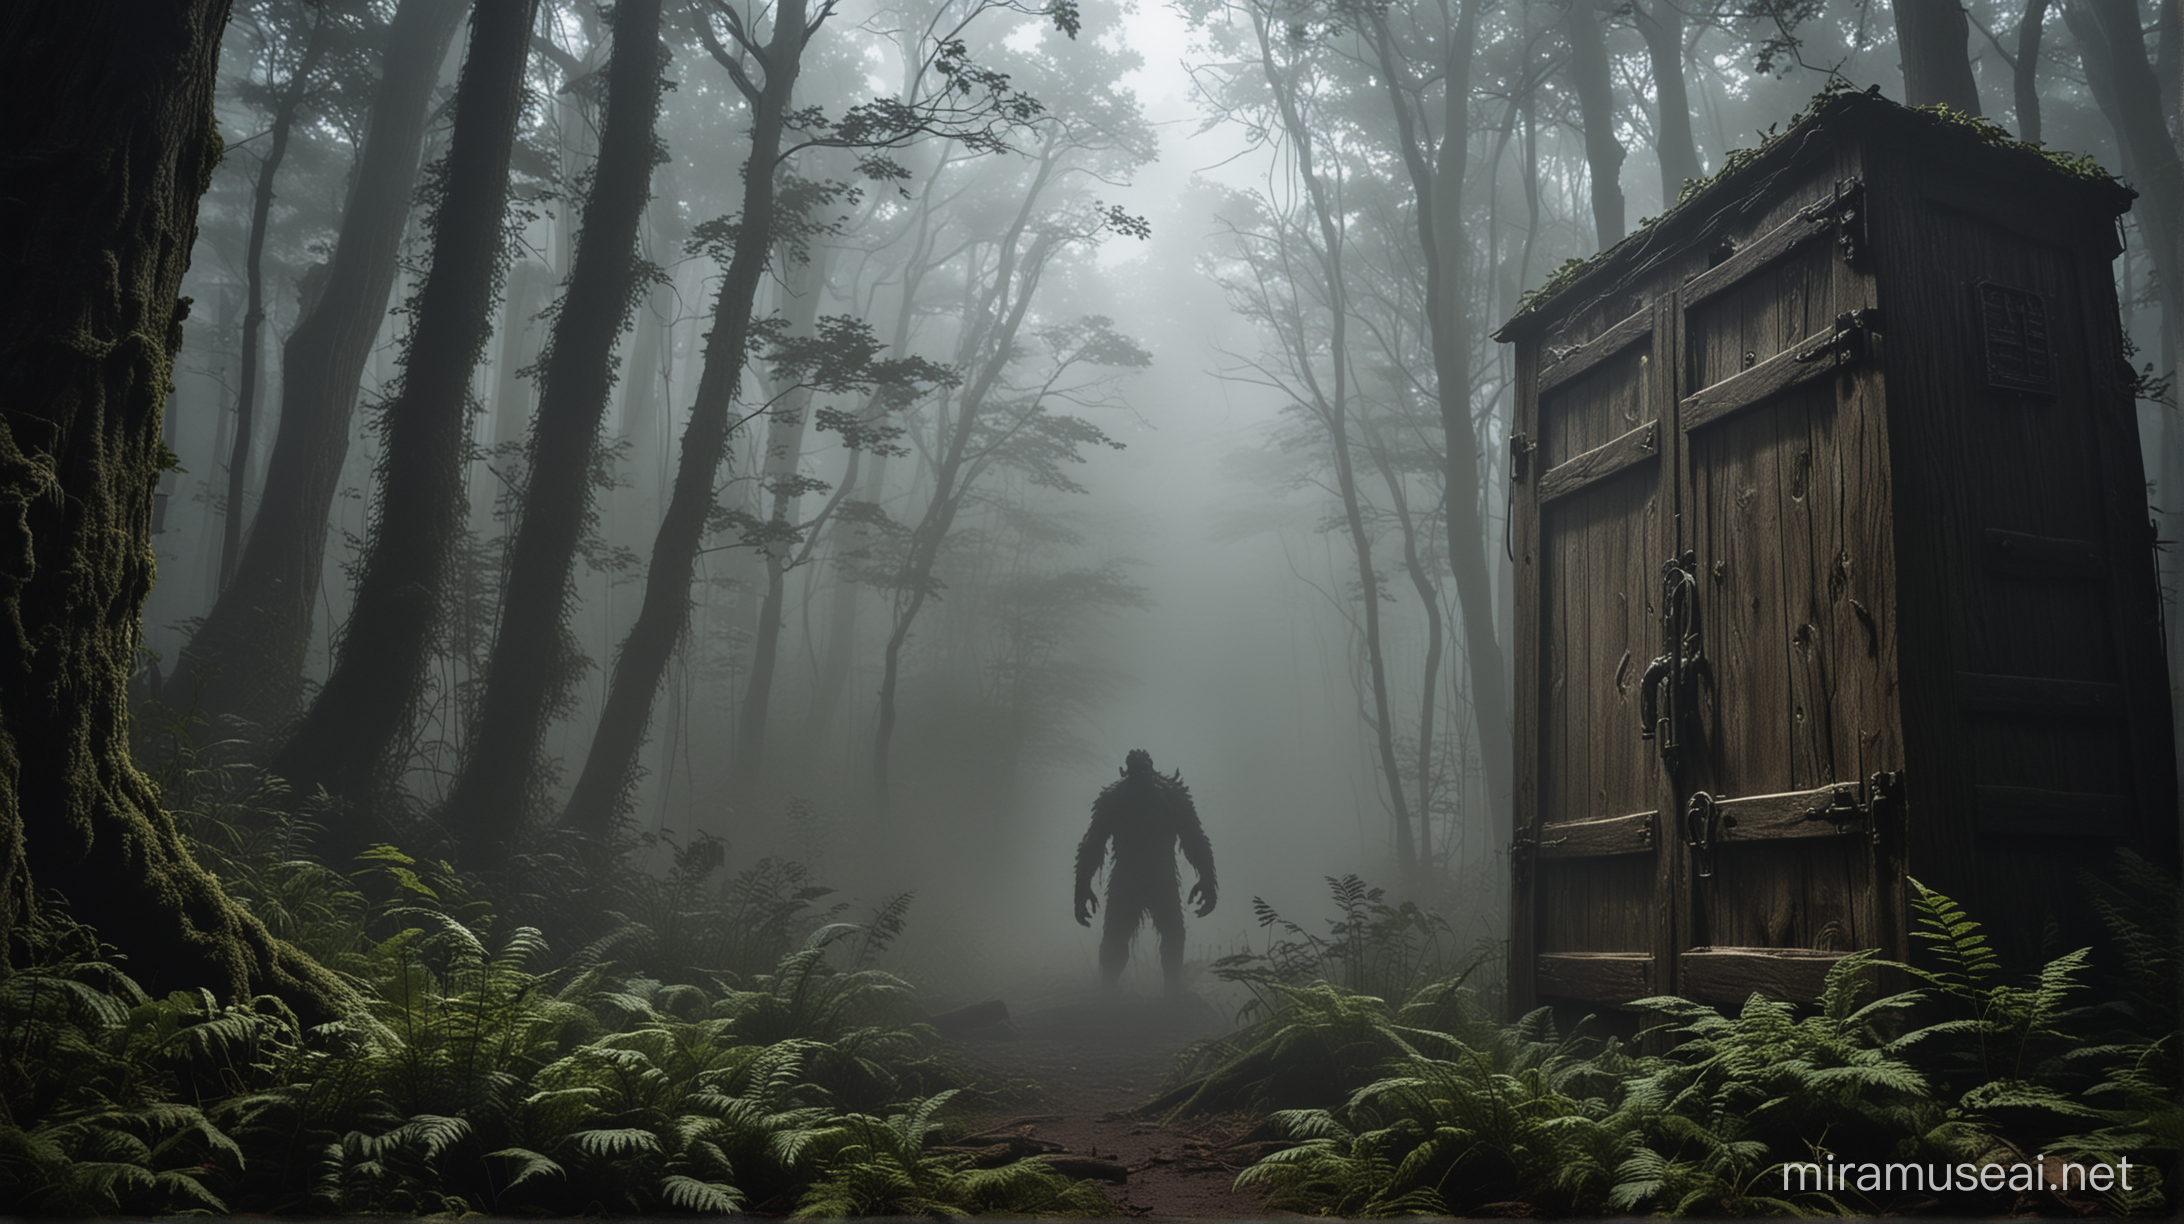 Background: A mystical forest setting with towering trees and mysterious fog rolling in.The monster is reaching towards a weathered locker hidden among the foliage, its clawed hand gripping the latch.Centerpiece: A large, fearsome monster emerging from the shadows, its glowing eyes piercing through the darkness.